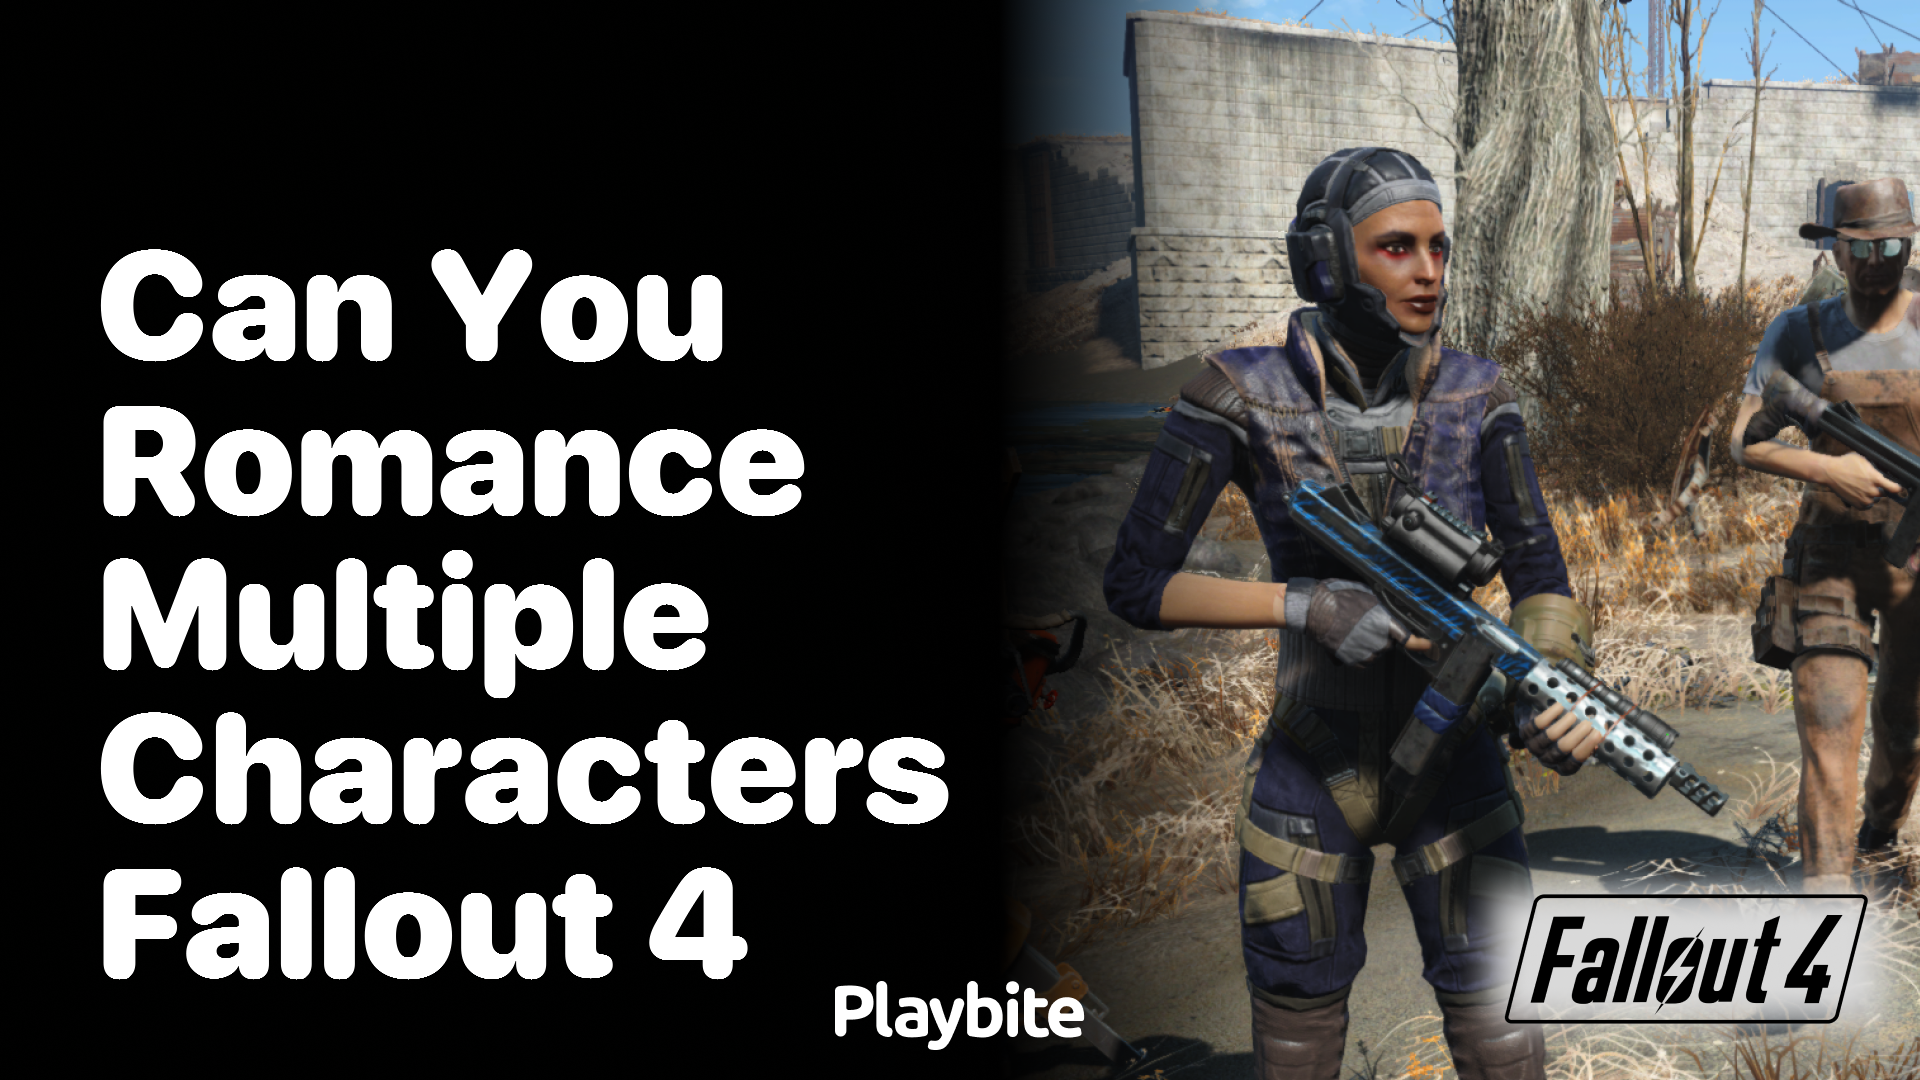 Can you romance multiple characters in Fallout 4?